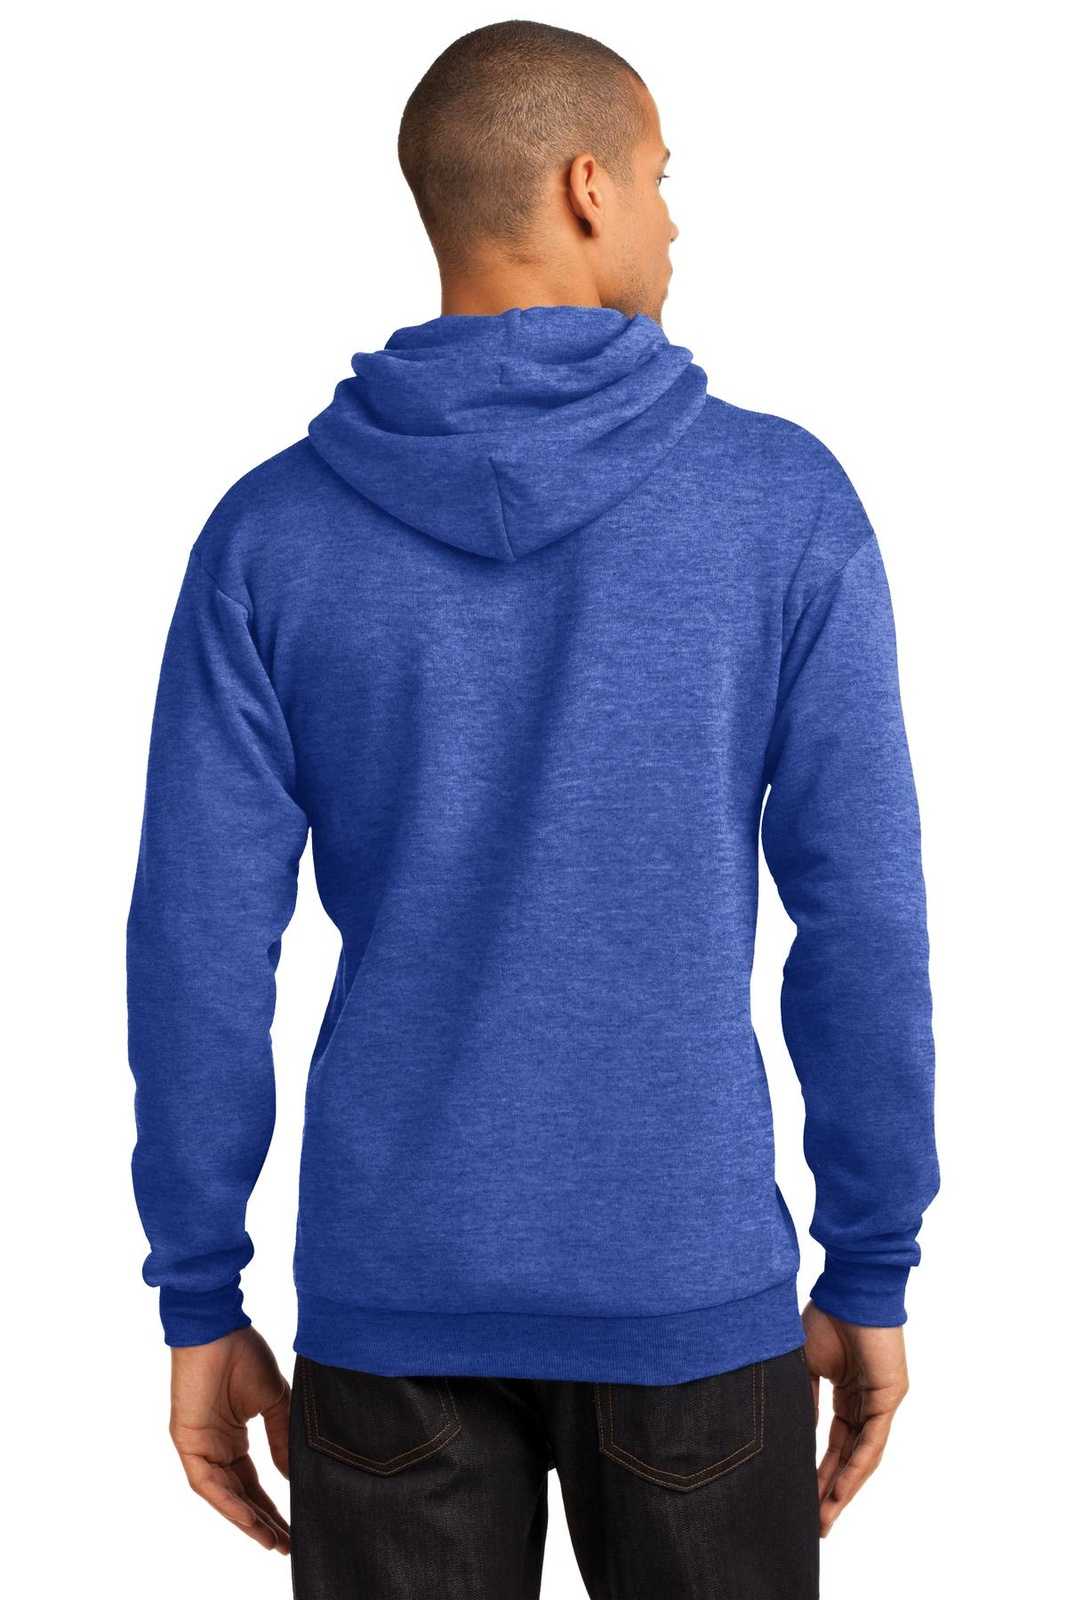 Port &amp; Company PC78H Core Fleece Pullover Hooded Sweatshirt - Heather Royal - HIT a Double - 2